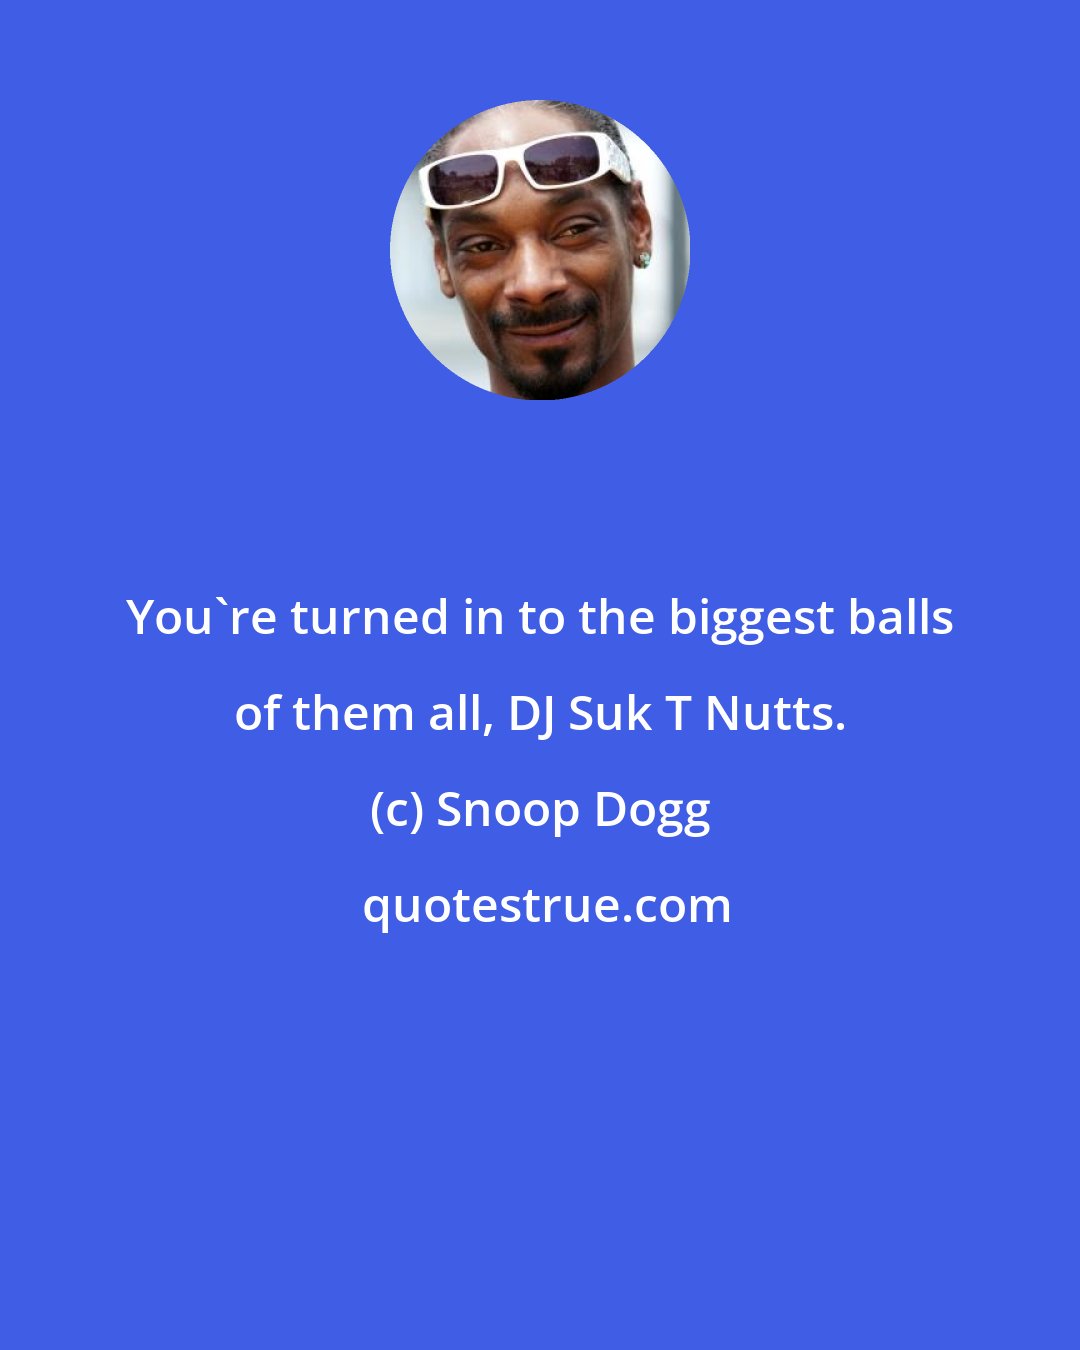 Snoop Dogg: You're turned in to the biggest balls of them all, DJ Suk T Nutts.